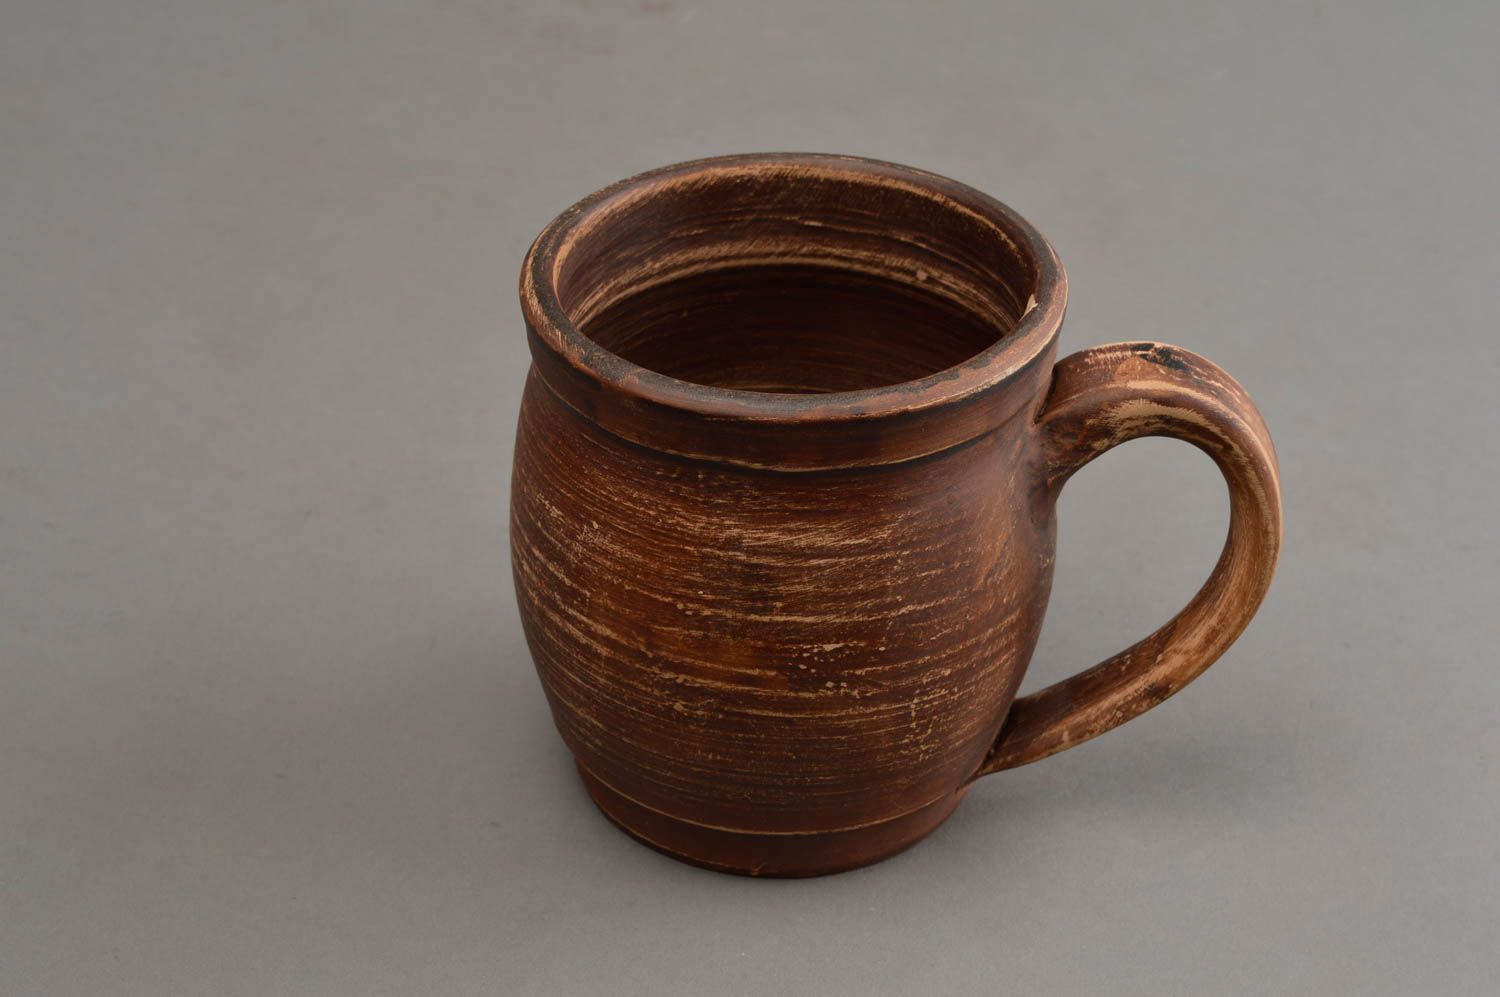 13 oz large clay coffee mug with handle in ancient style 0,77 lb photo 3